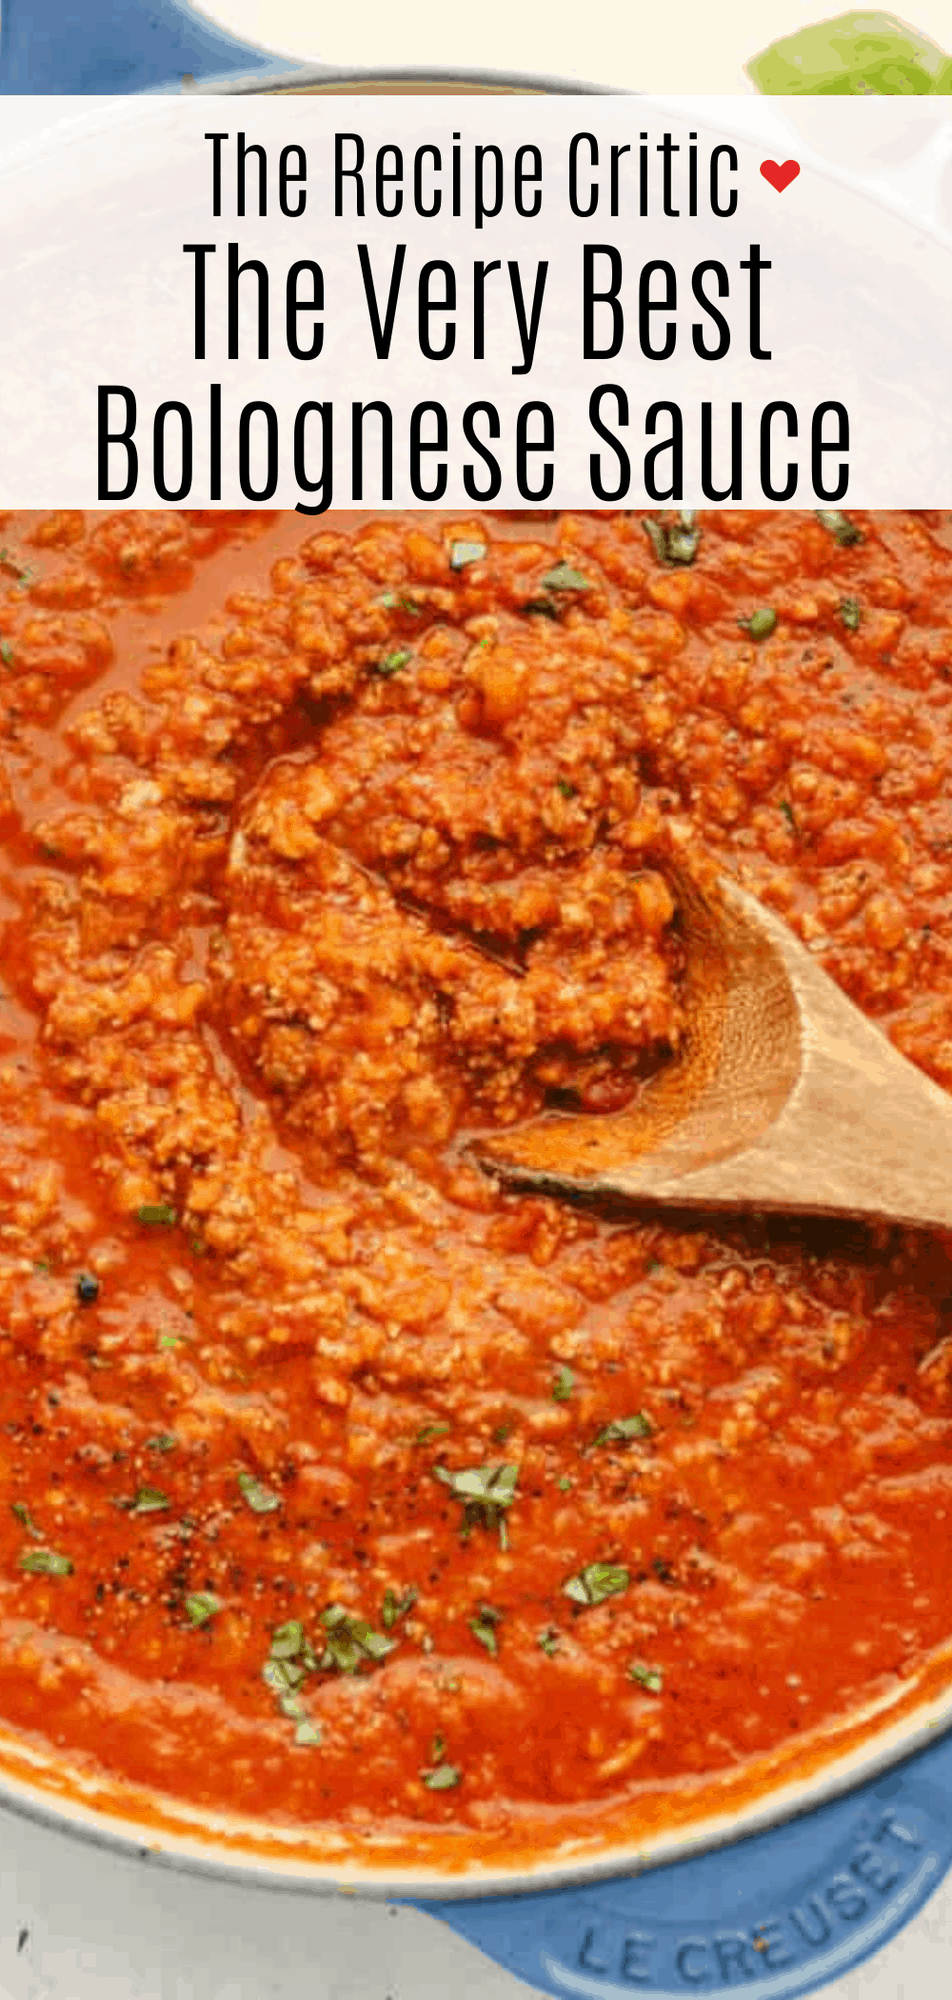 The Very Best Bolognese Sauce | The Recipe Critic